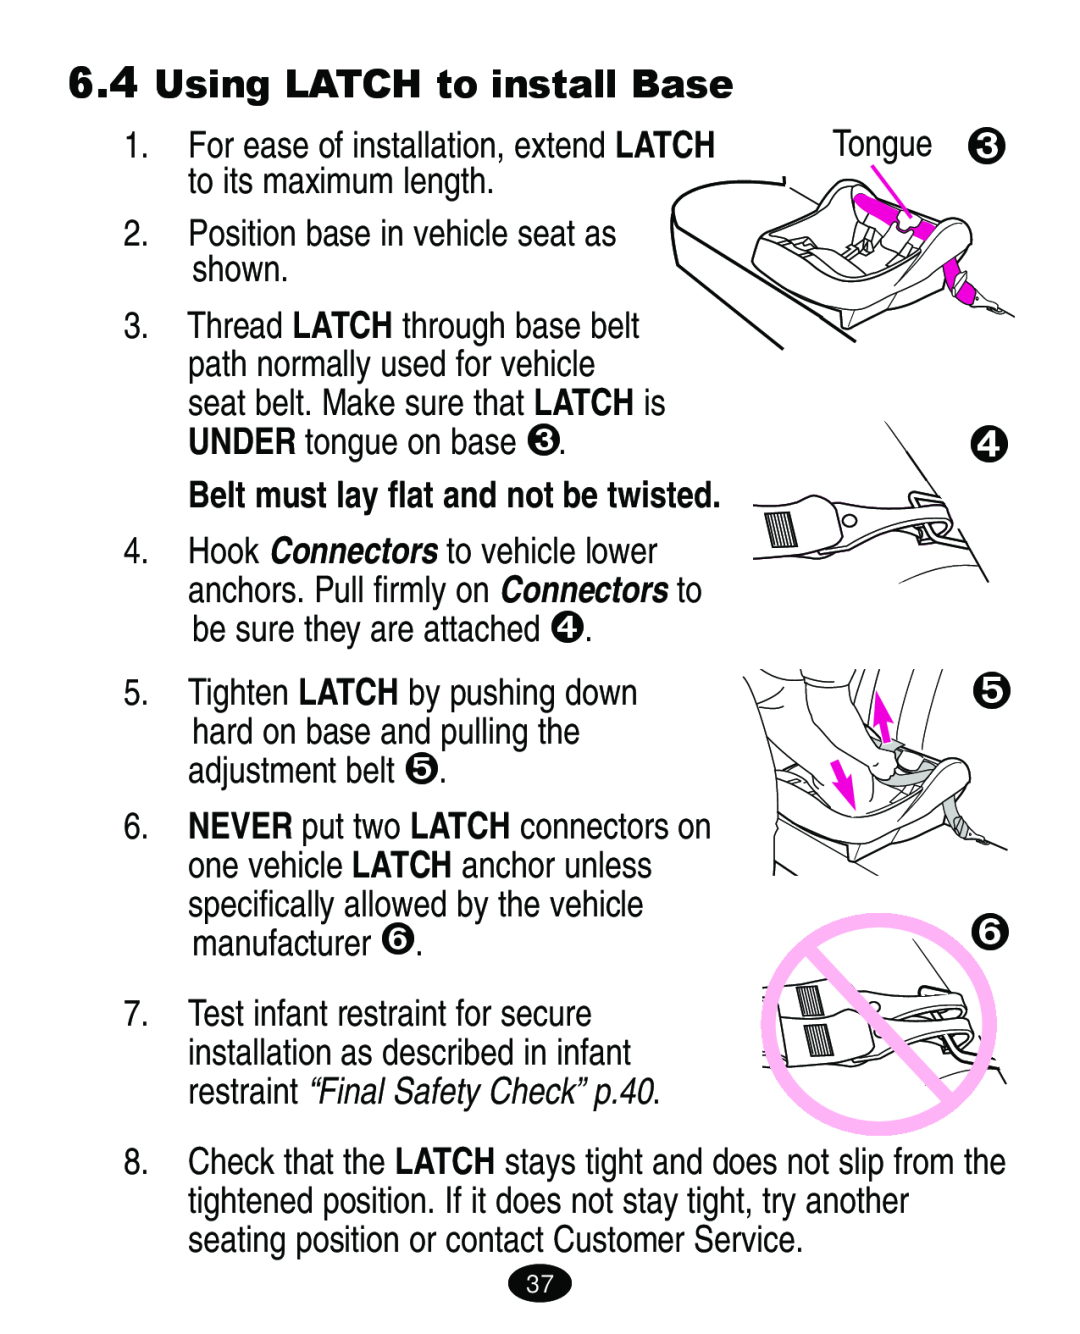 Graco ISPA108AB manual Using LATCH to install Base, restraint “Final Safety Check” p.40 